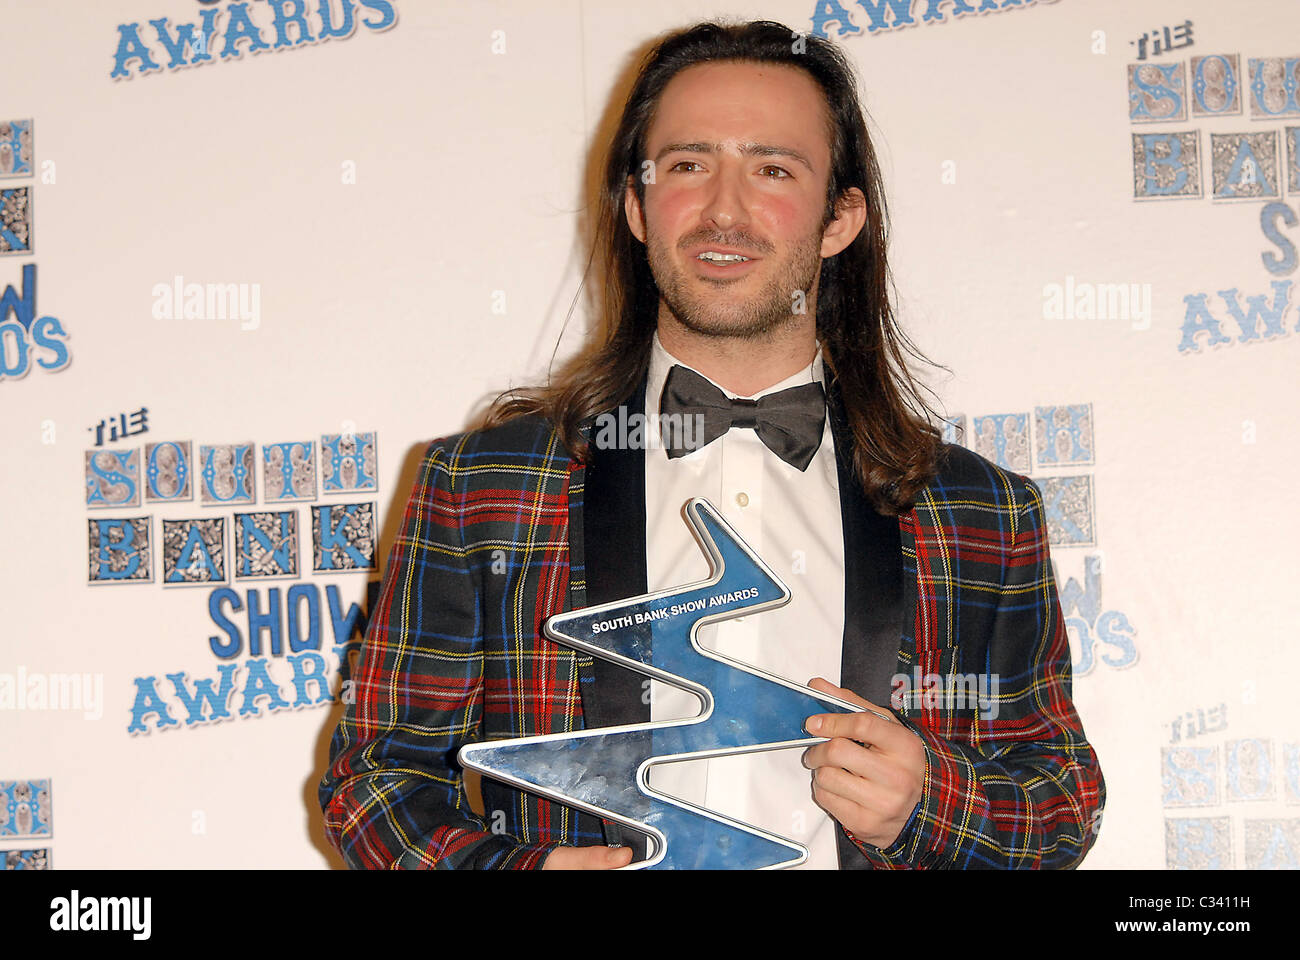 Aaron Sillis, winner (Dance) South Bank Show Awards held at the Dorchester Hotel - Press Room London, England - 20.01.09 Vince Stock Photo